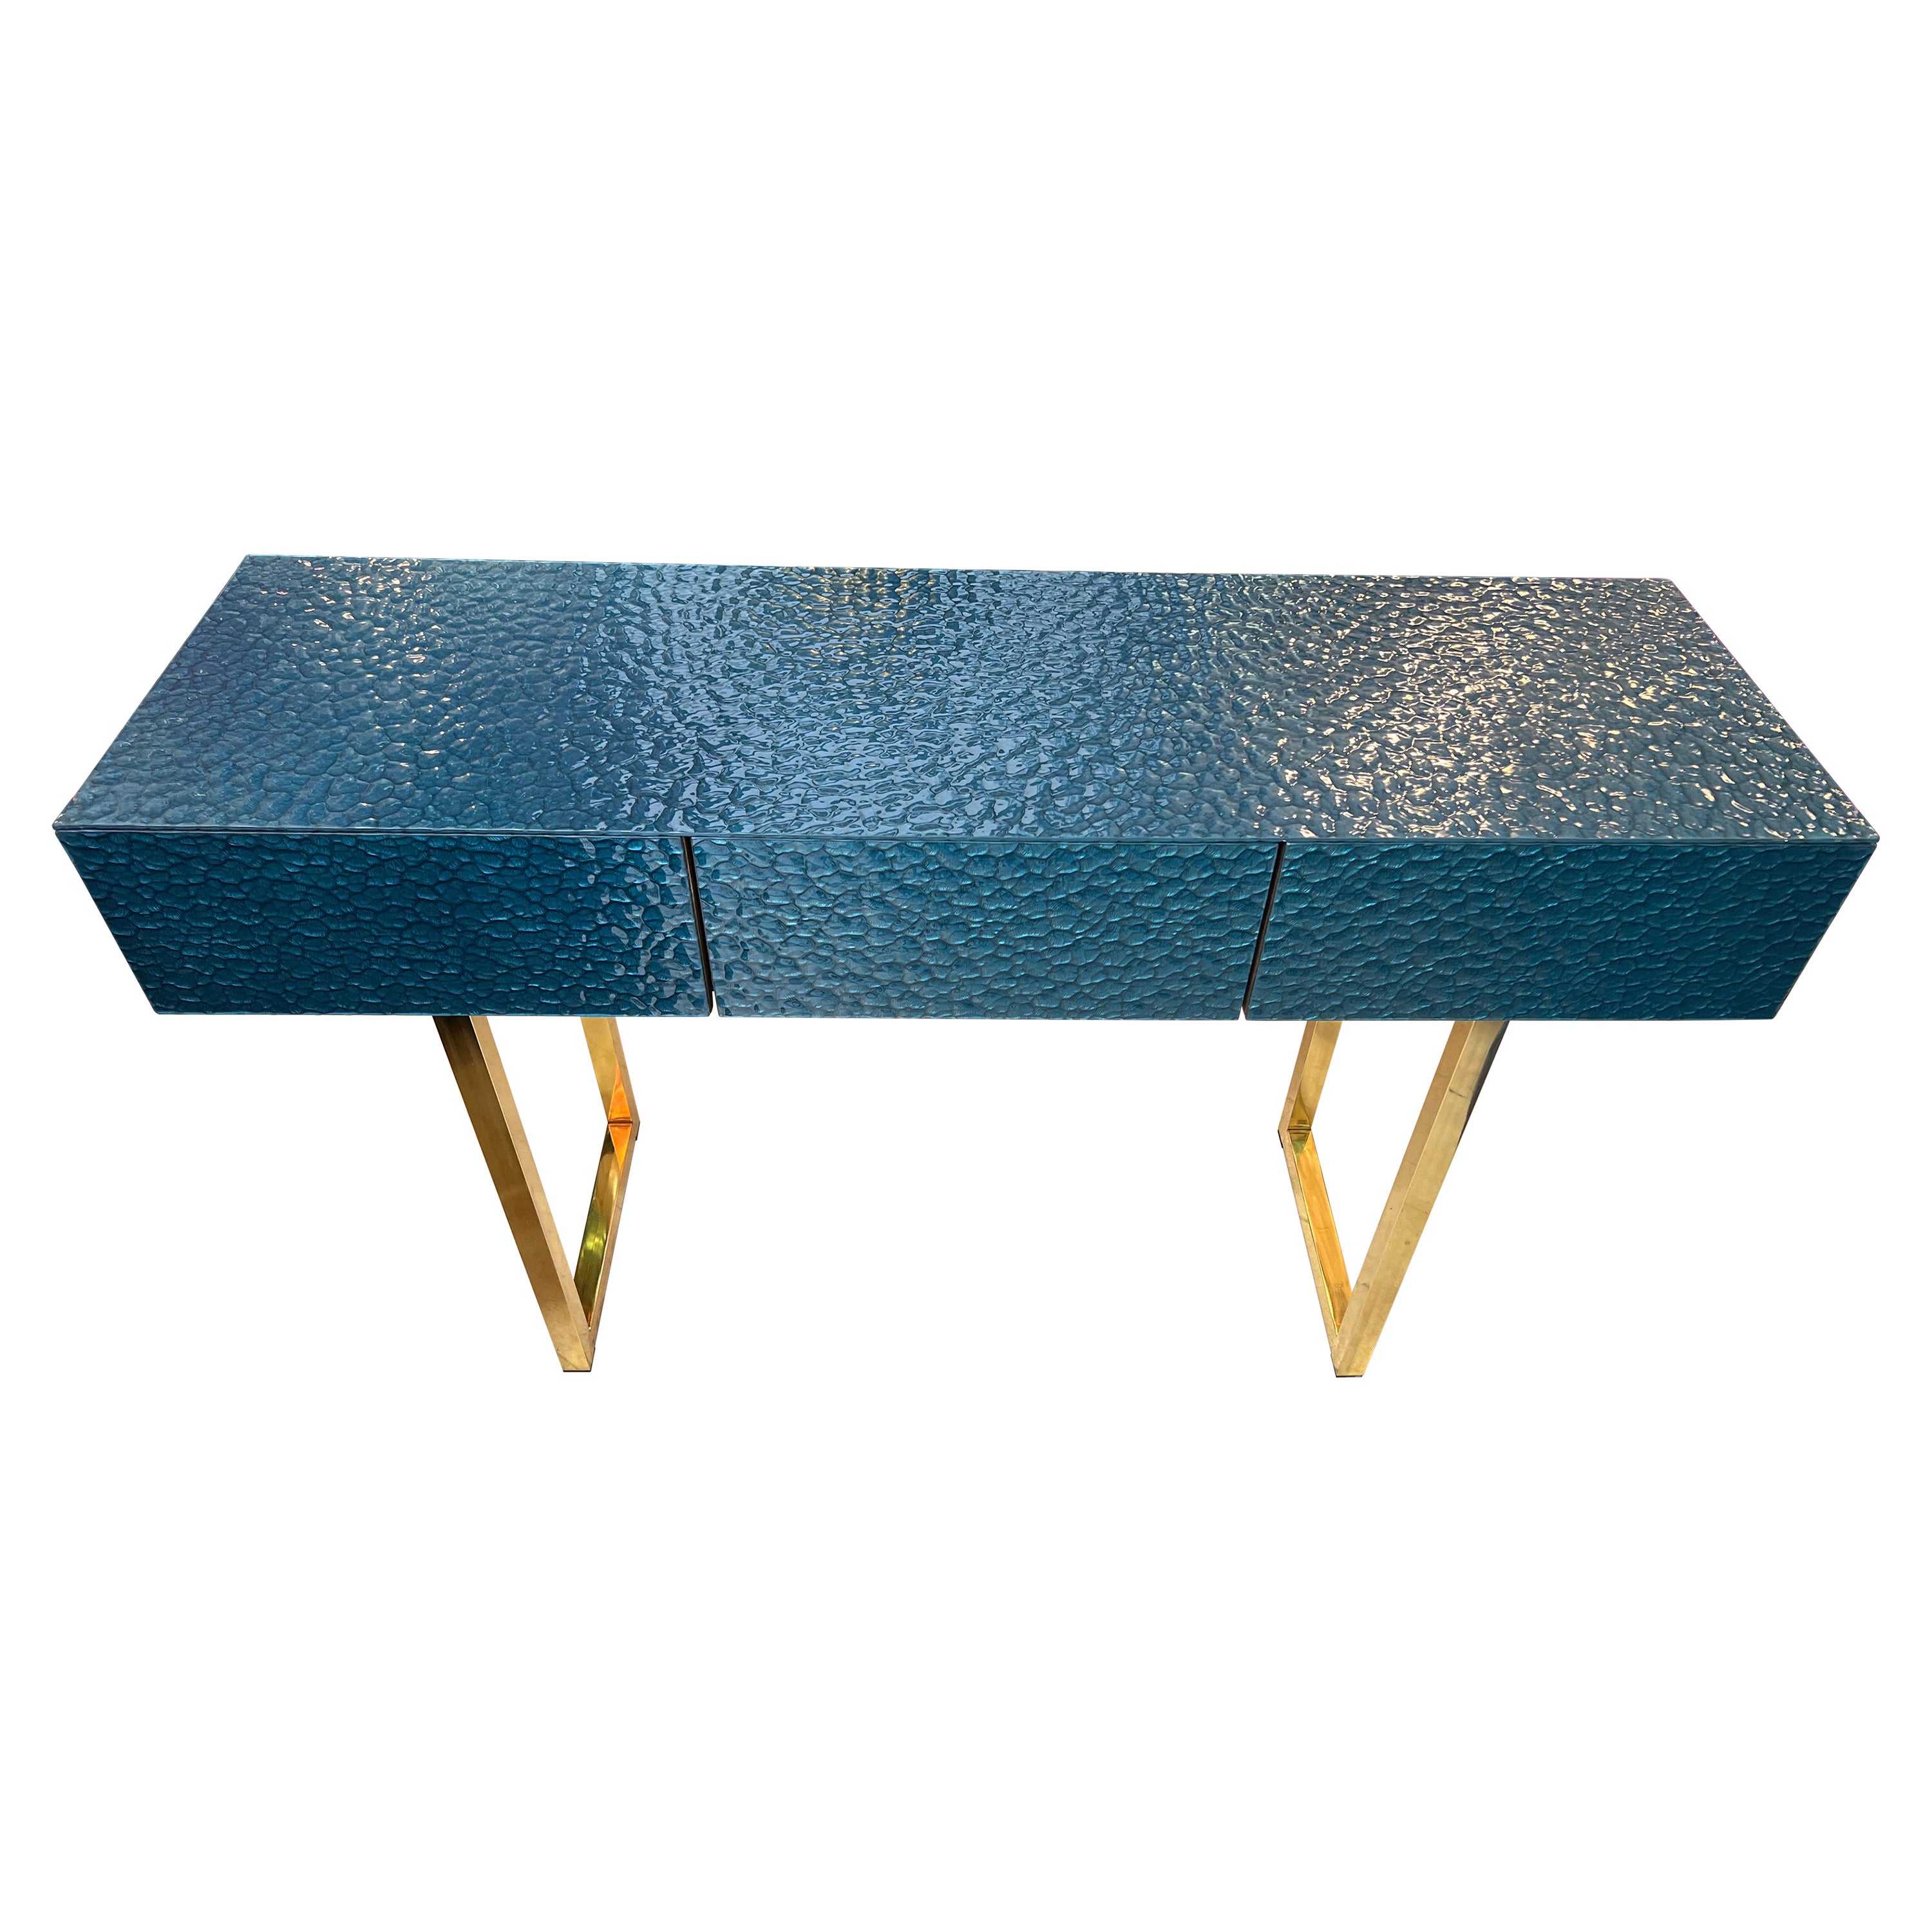 Petrol Green Murano Ashlar Glass and Brass Console Table with Three Drawers 2000 For Sale